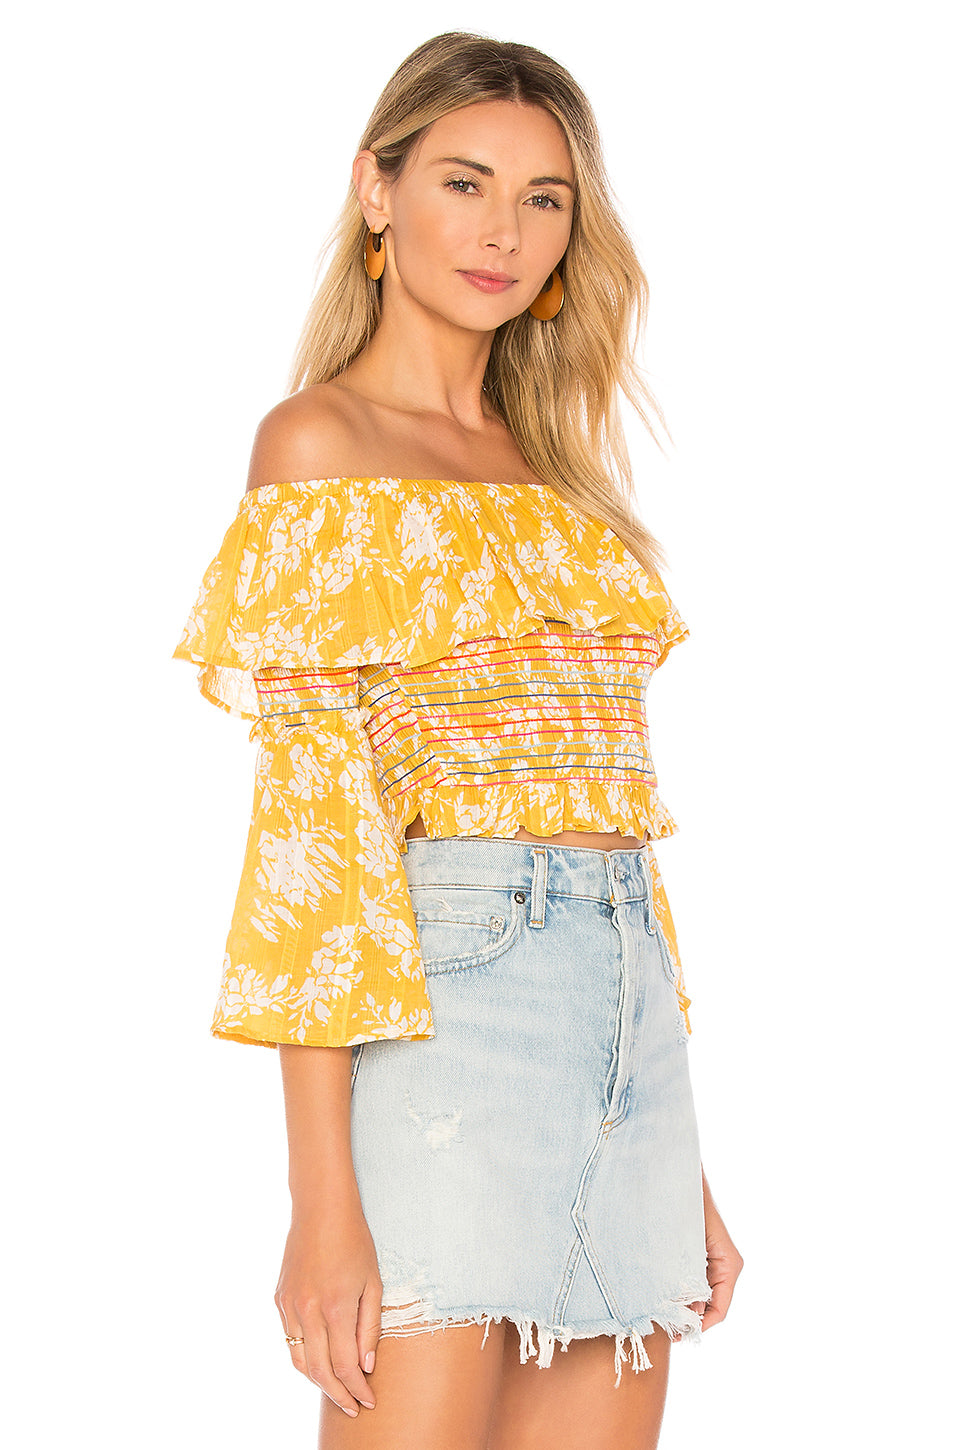 Rudy Top in HILLCHREST FLORAL